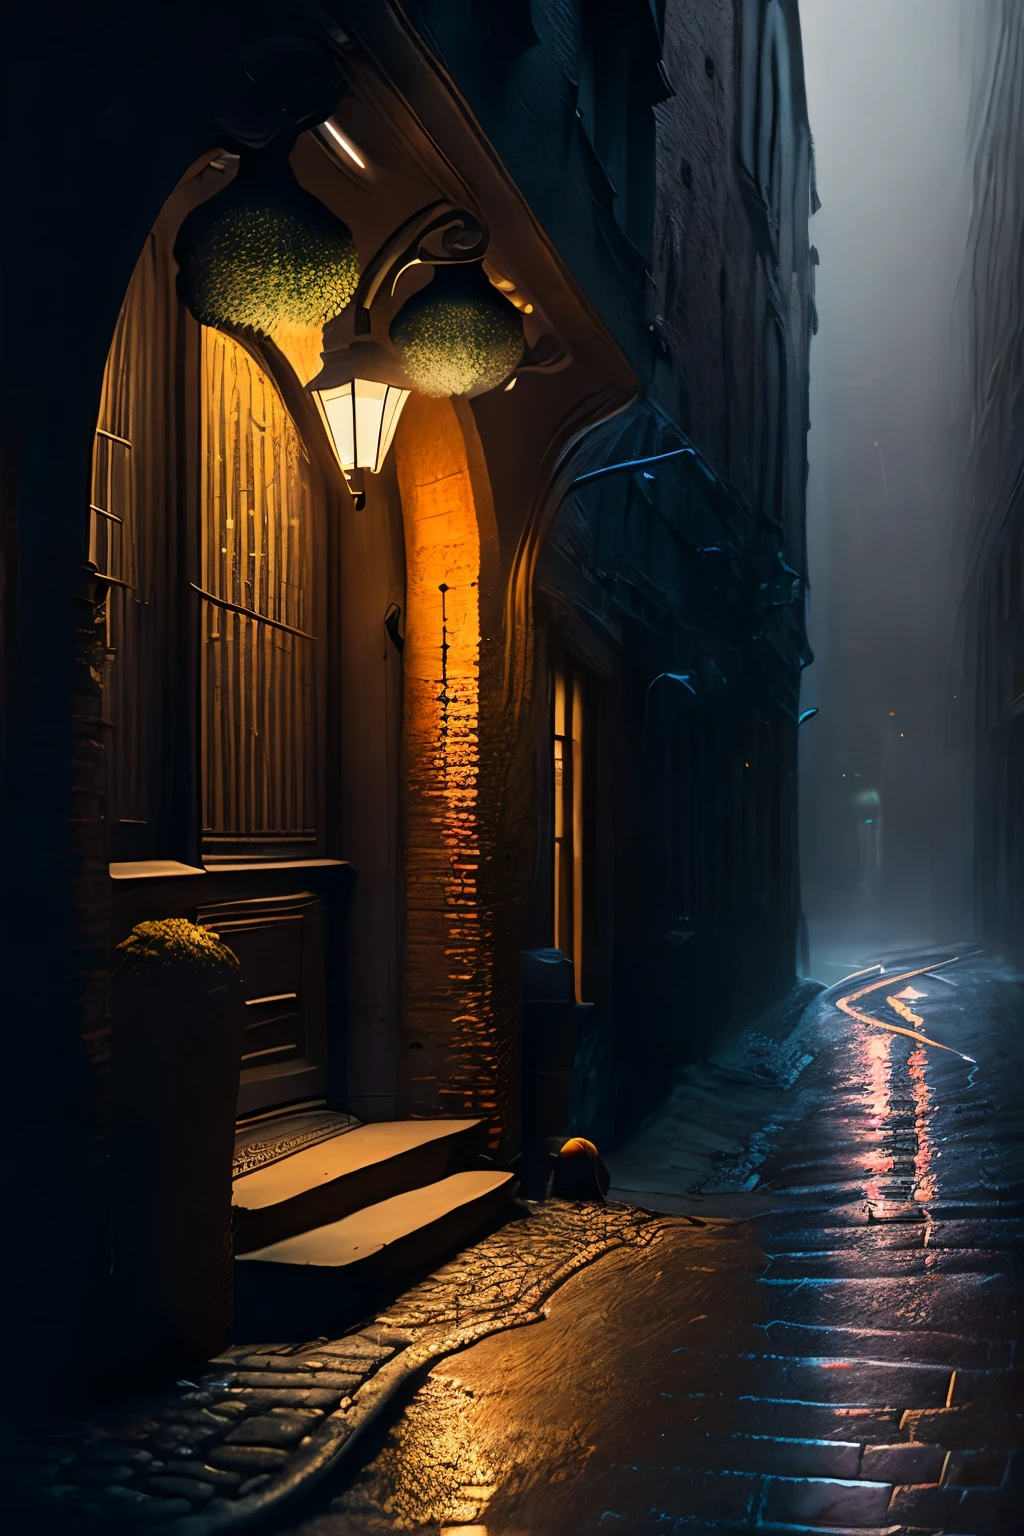 Dark alley on a gloomy, mystical,  and mysterious night, a floor made of wet cobblestones, with gutters running accumulated rainwater, a slightly torrential rain, a man with a hooded case distancing himself in steps of escape from something that pursues him lurking, intricate, realism, half-blurred image of escape movements, hazy and mucus tentacles subtly emerging in the corners of the mysterious street.